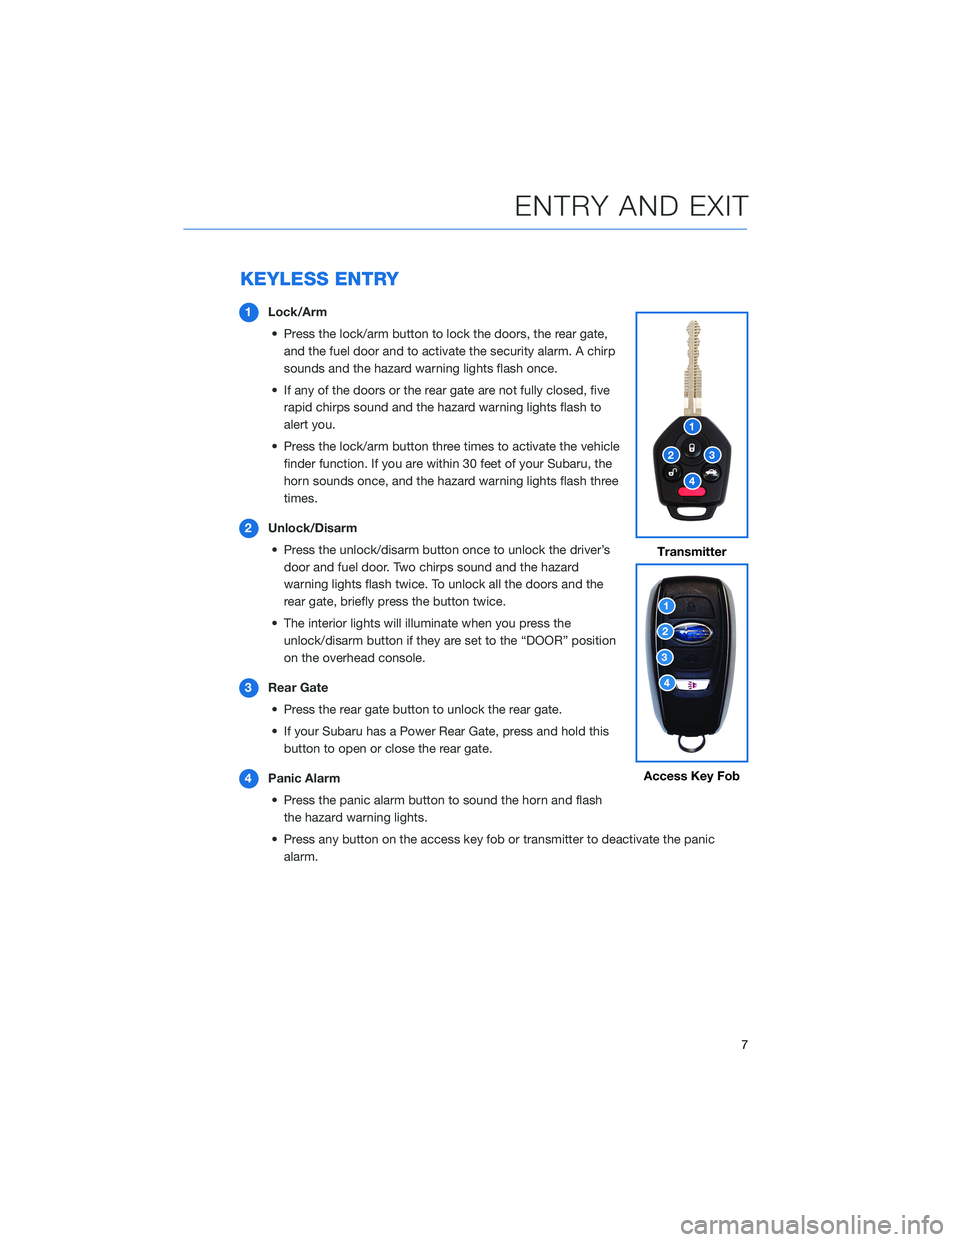 SUBARU ASCENT 2022  Getting Started Guide KEYLESS ENTRY
1Lock/Arm
• Press the lock/arm button to lock the doors, the rear gate,
and the fuel door and to activate the security alarm. A chirp
sounds and the hazard warning lights flash once.
�